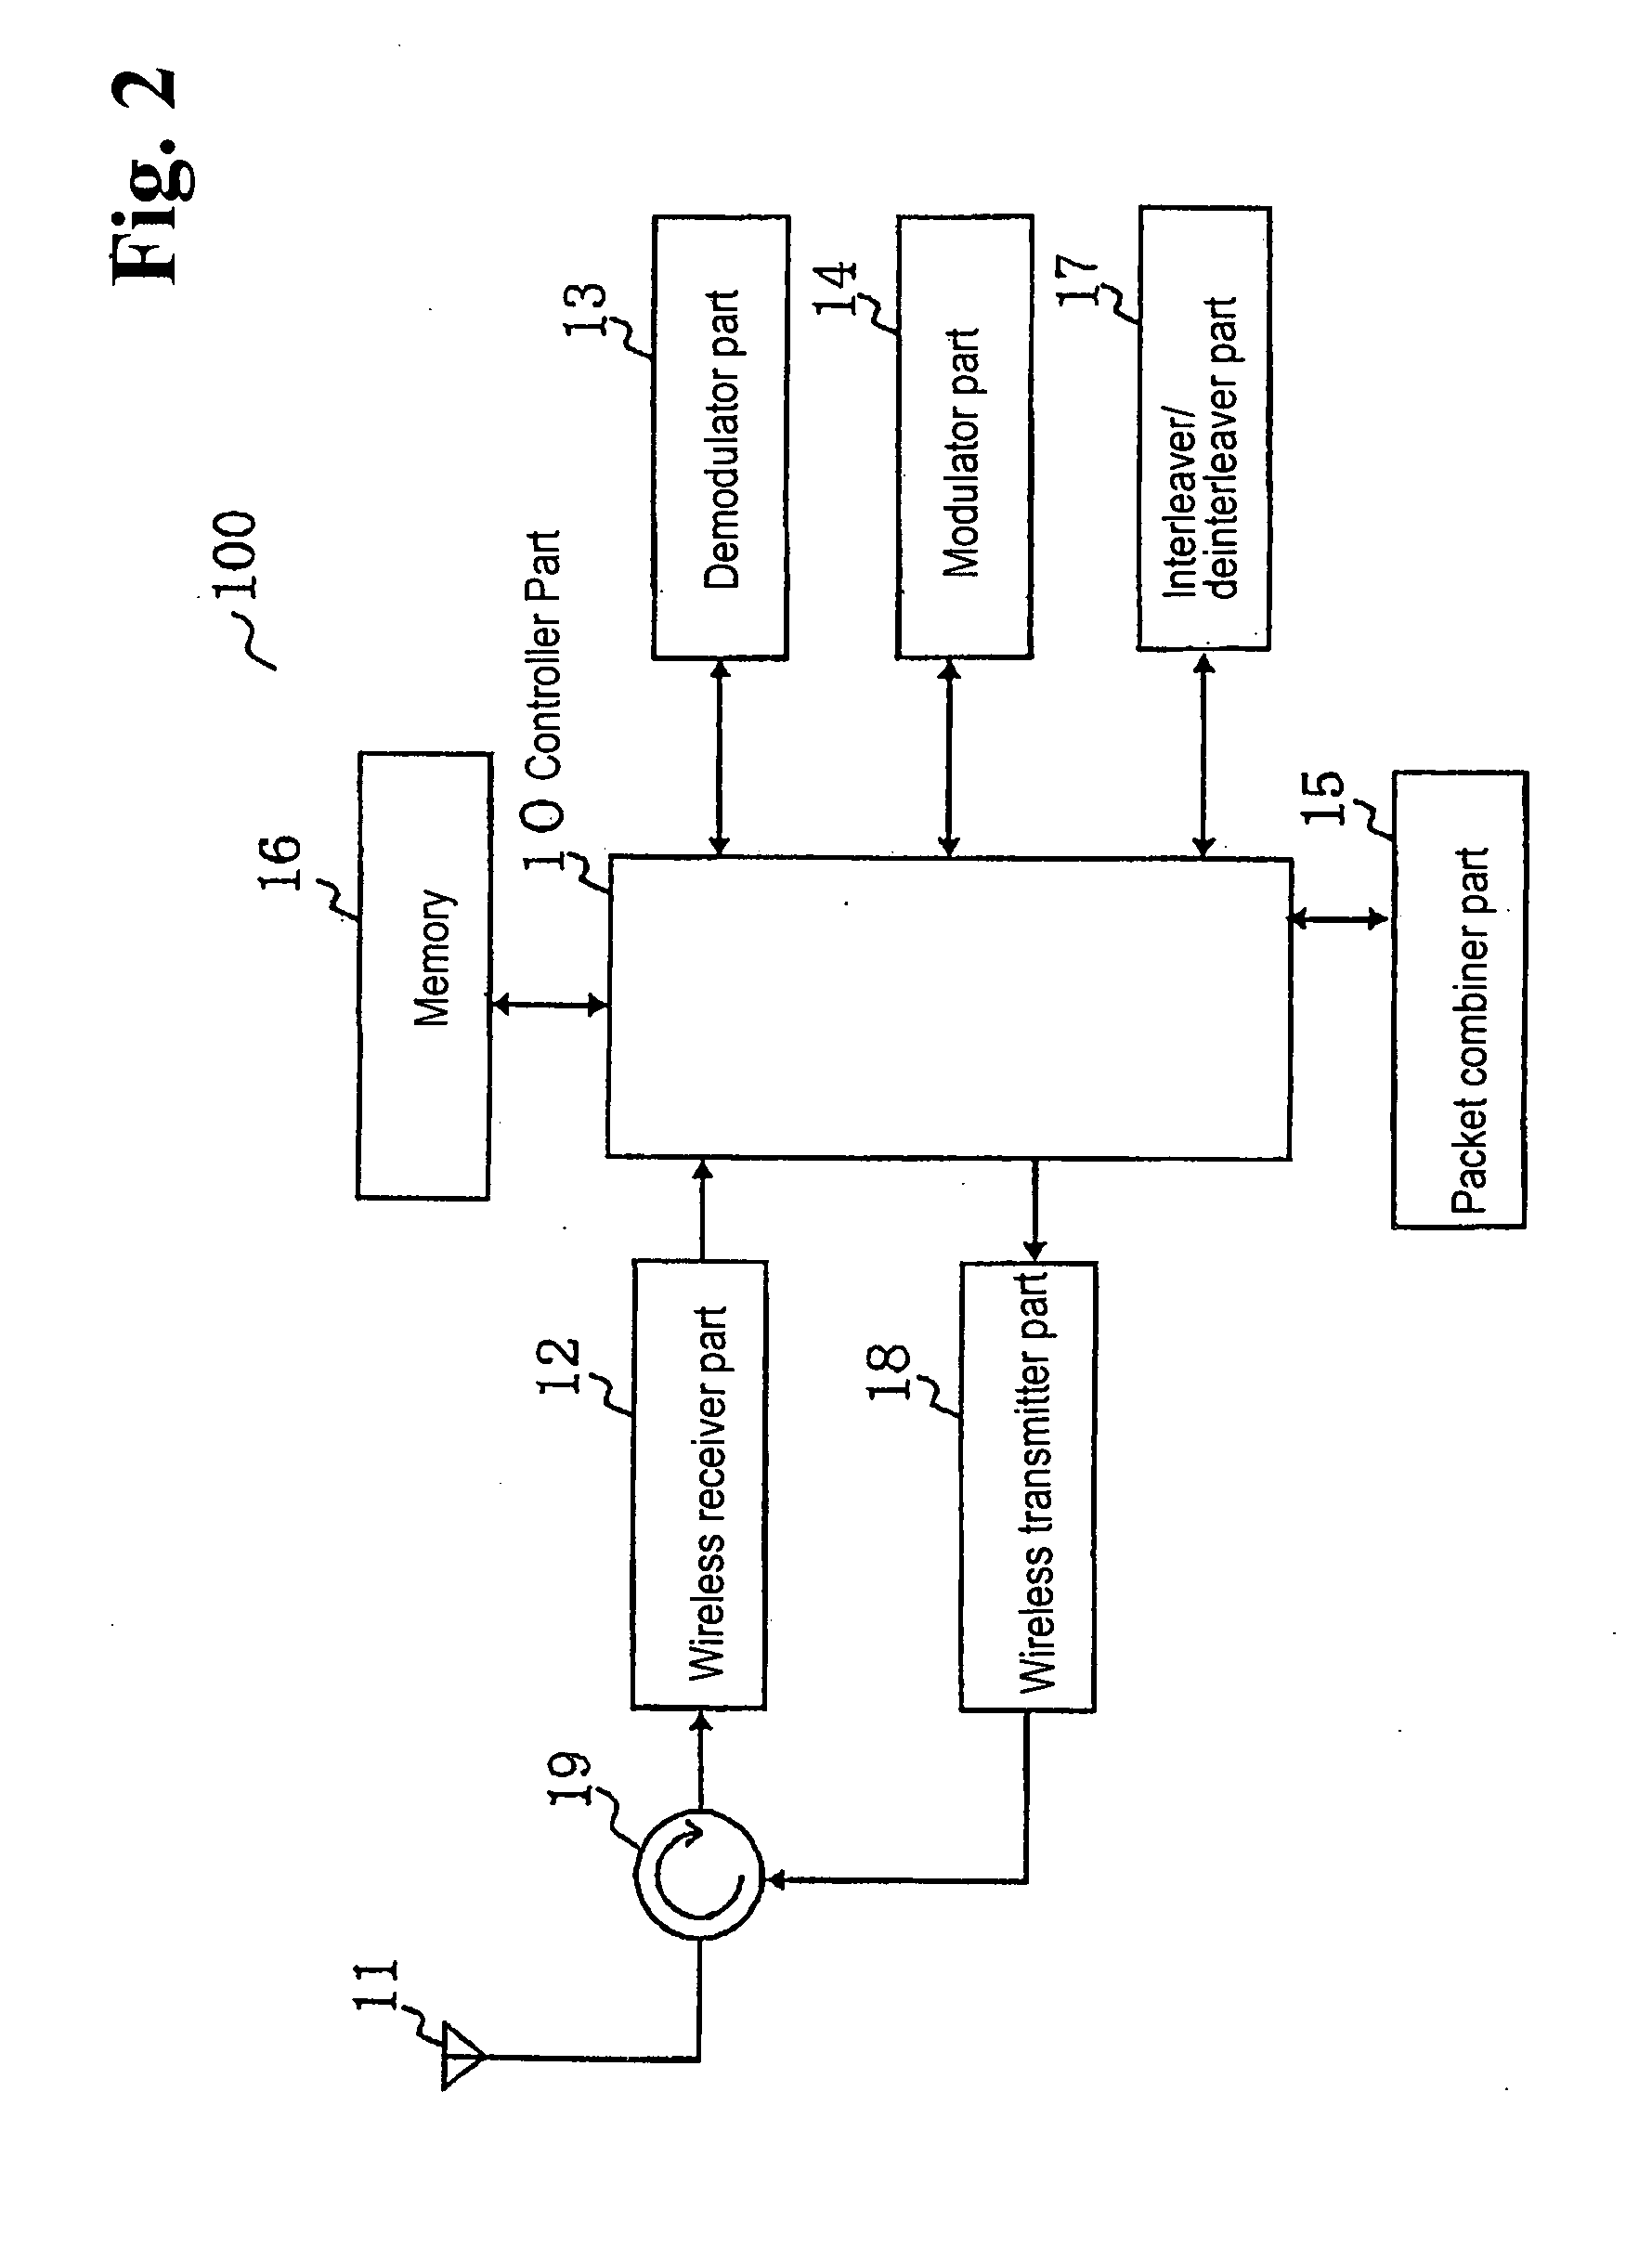 Communication System, a Repeater Terminal in a Communication System and a Communication Method